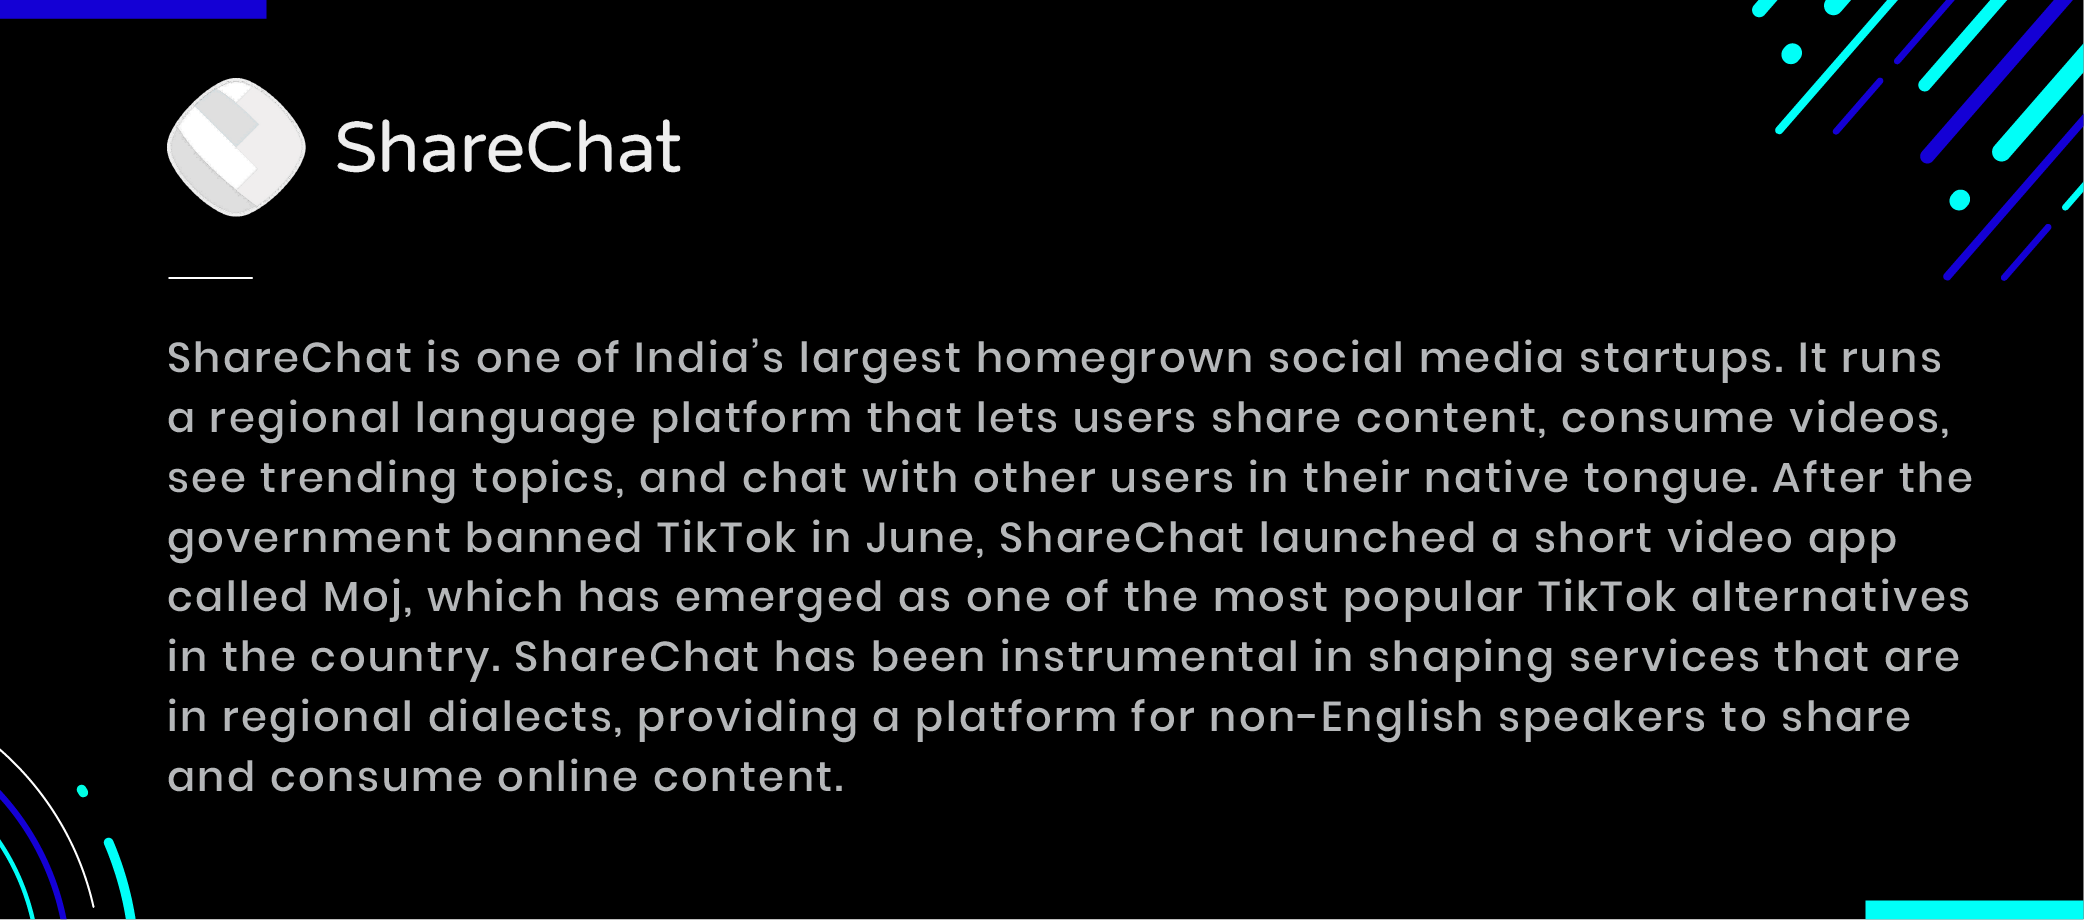 Sharechat india social media share content consume videos trending topics native tongue chat Moj regional dialects